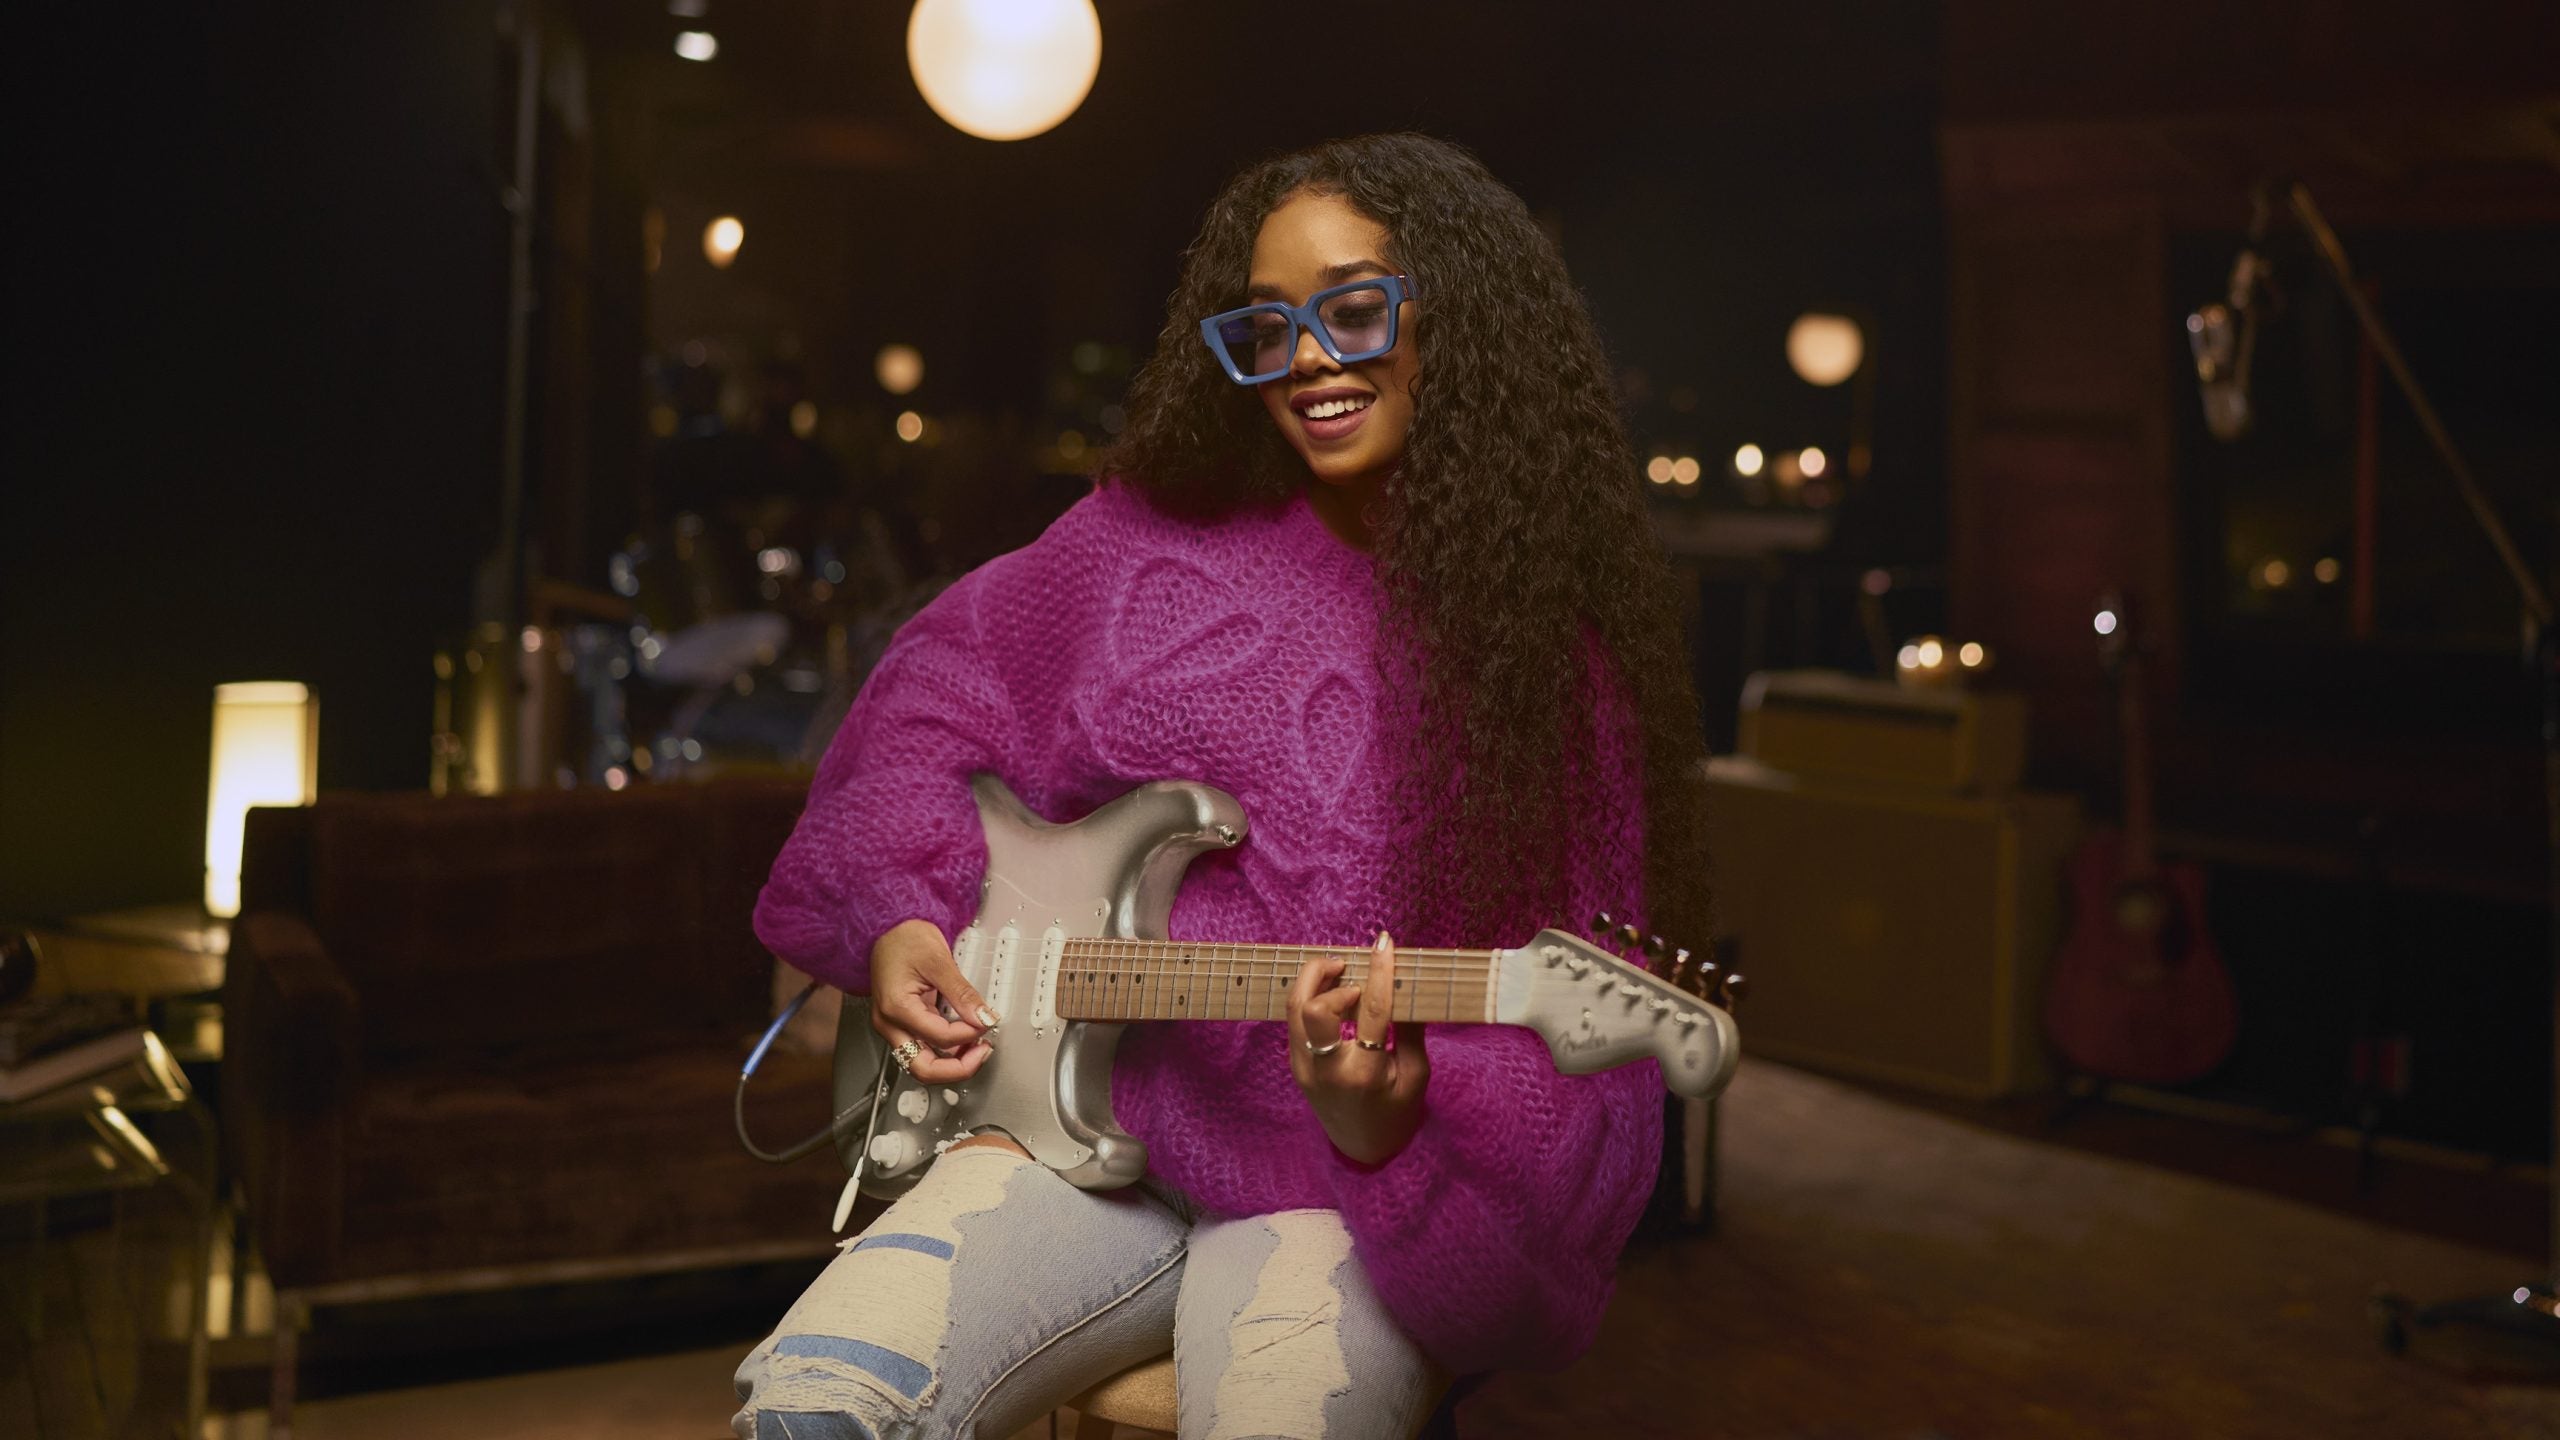 Exclusive: H.E.R. Says She's 'Ready For It All' As She Prepares To Make Her Acting Debut In 'The Color Purple'